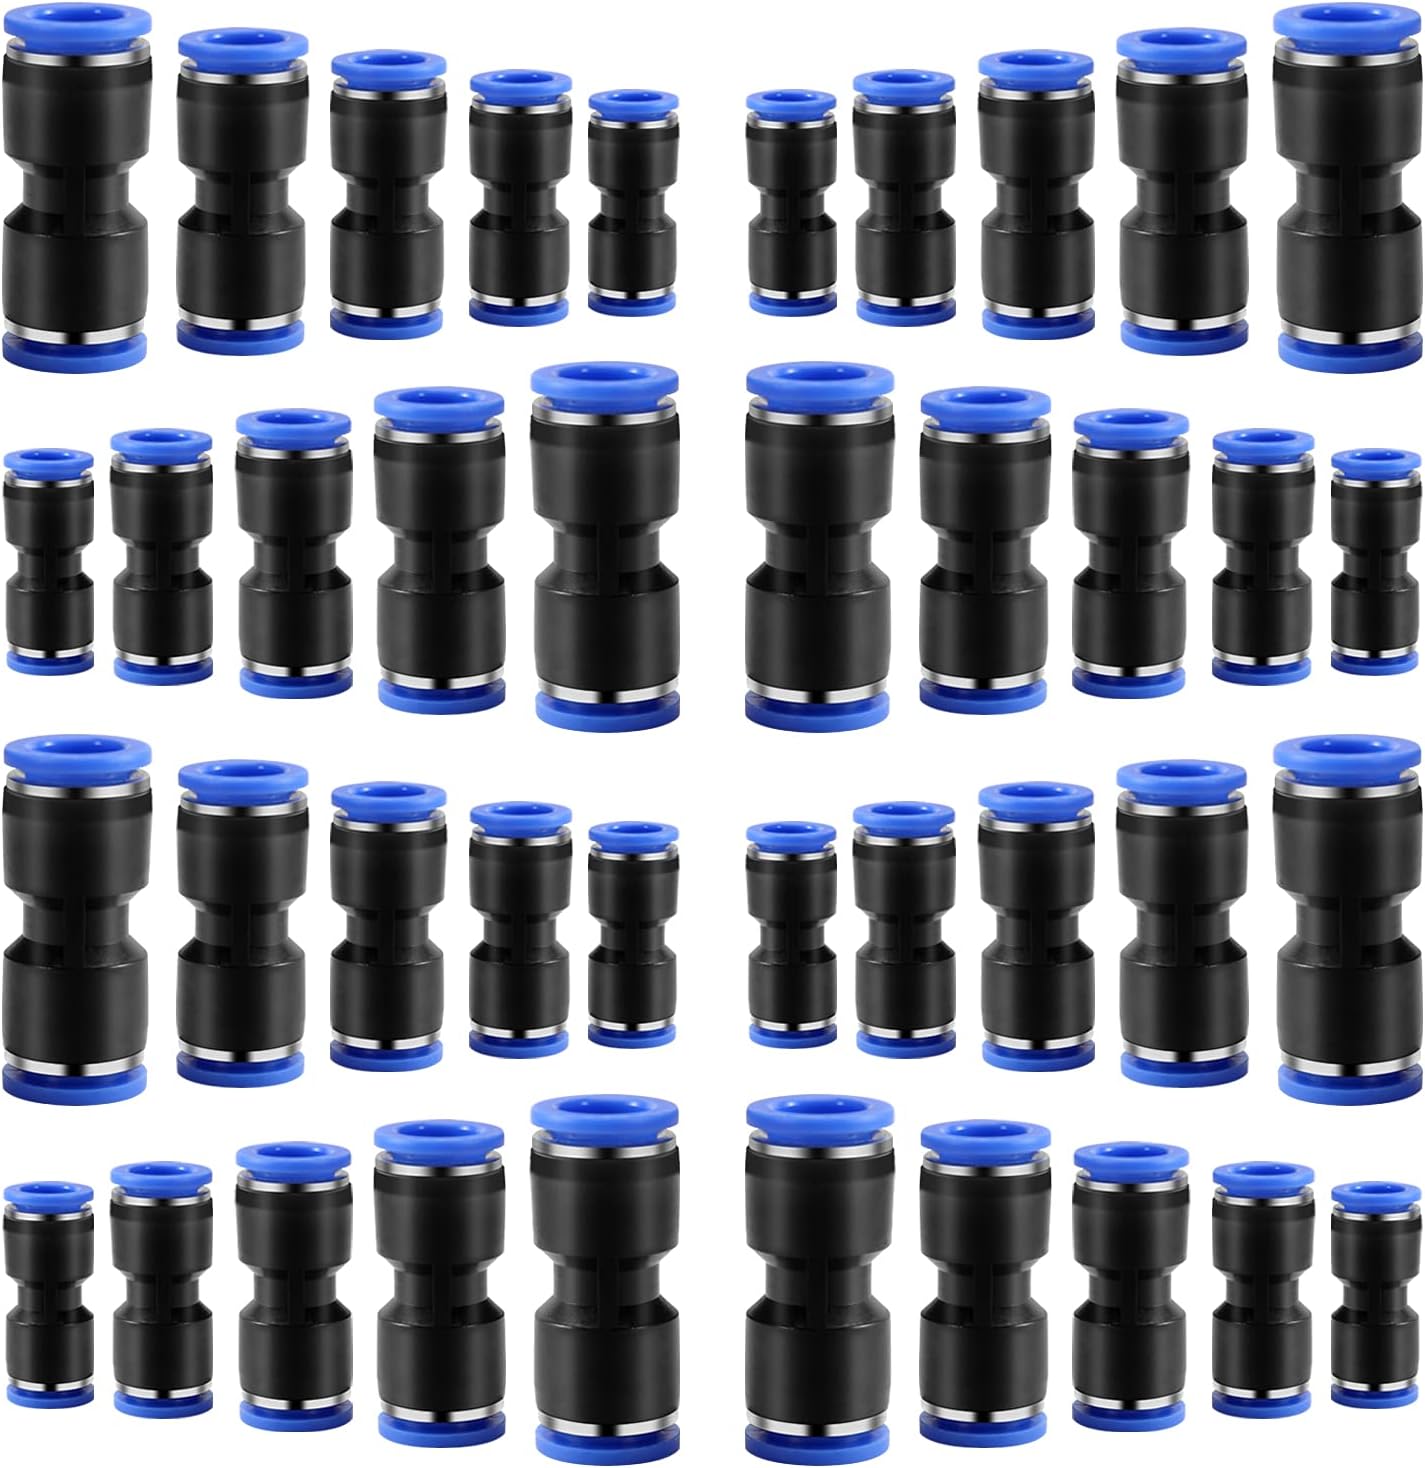 40 Pcs Straight Connectors Puch Pneumatic Fittings Air Line Quick Hose Repair 